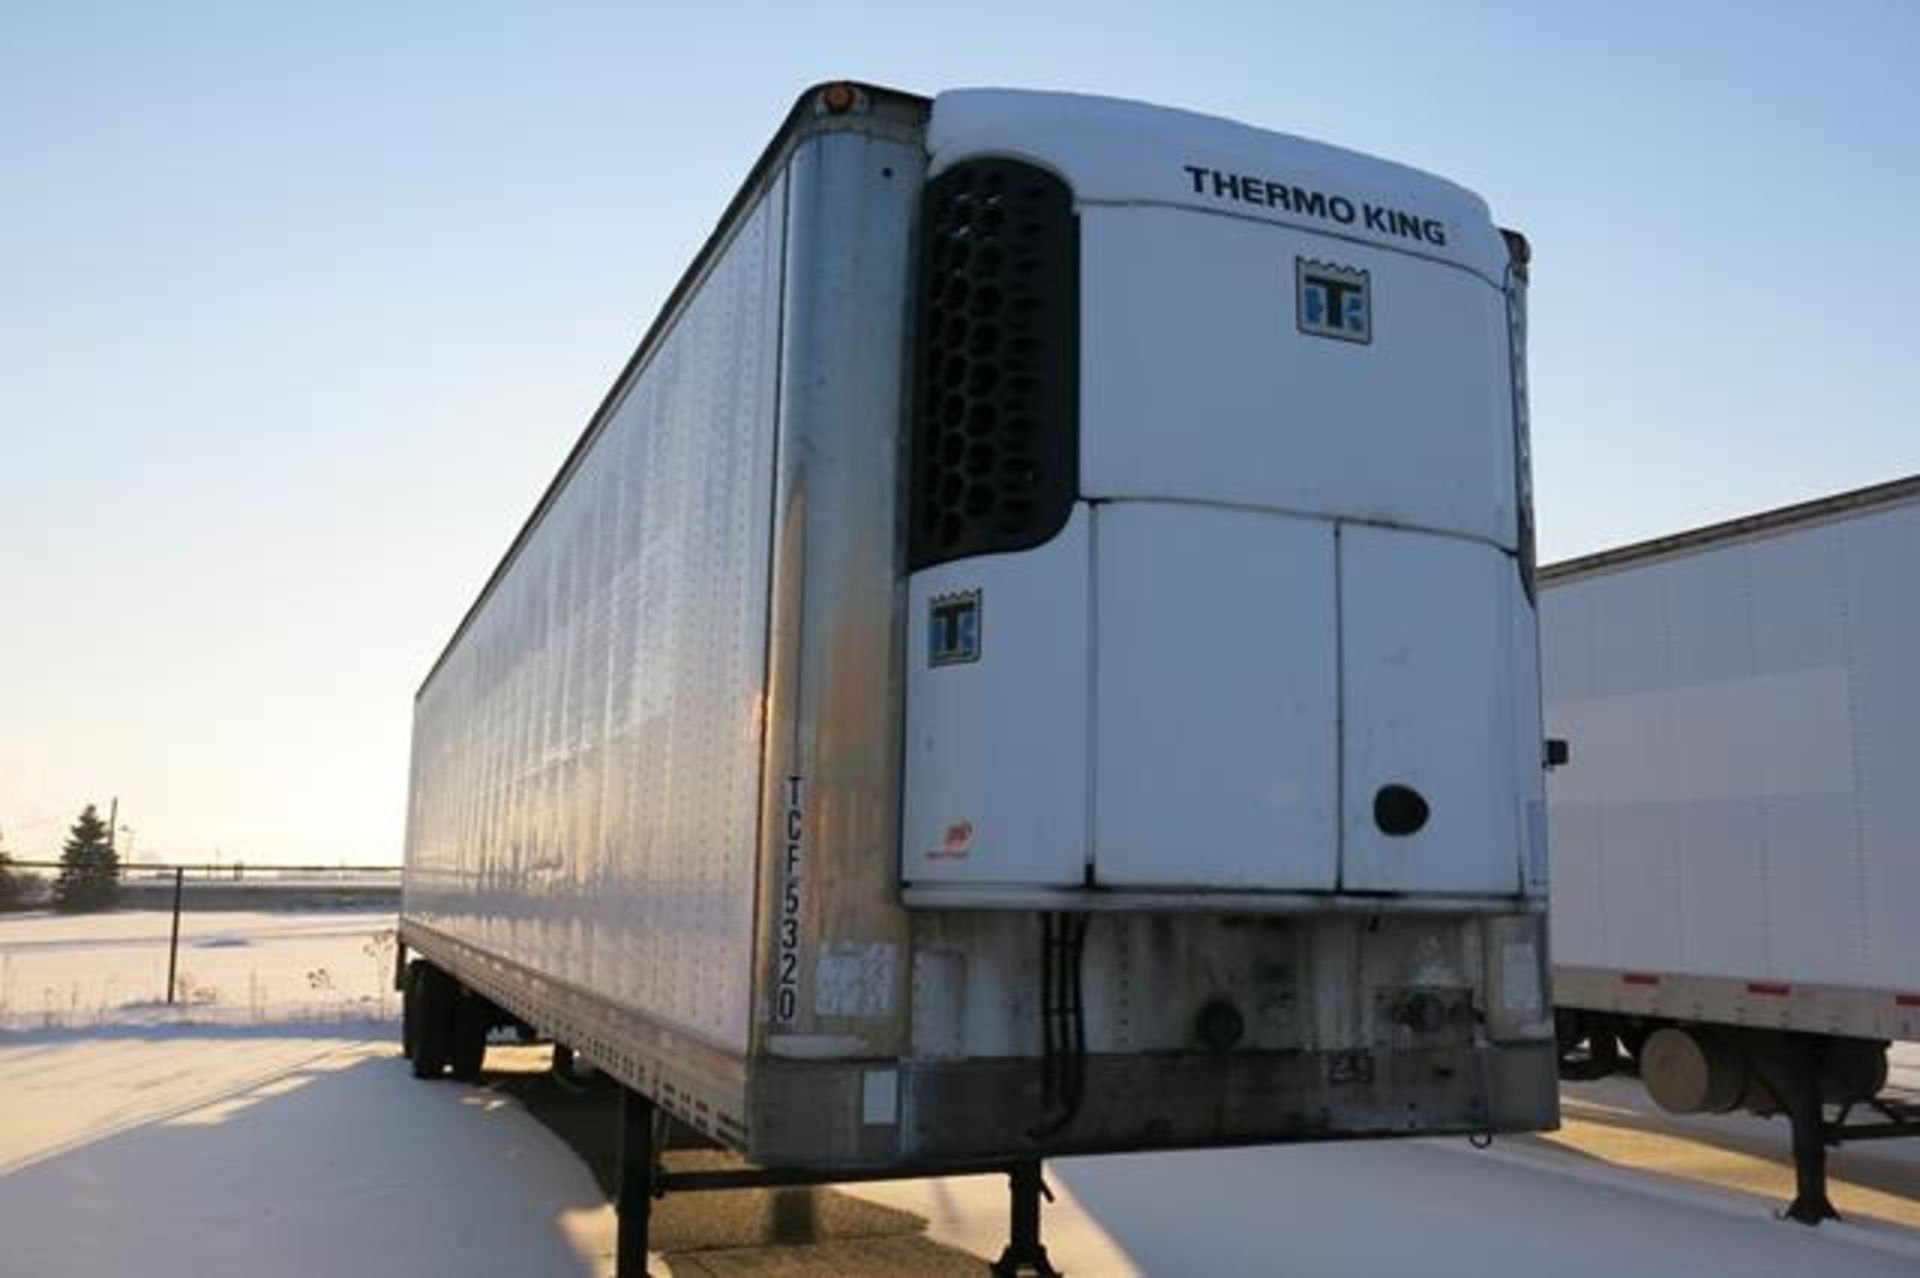 TRAILMOBILE, 53' REFRIGERATED VAN TRAILER, ROLLUP DOOR, THERMO KING, SB-210+, REEFER, 9,197 HOURS,